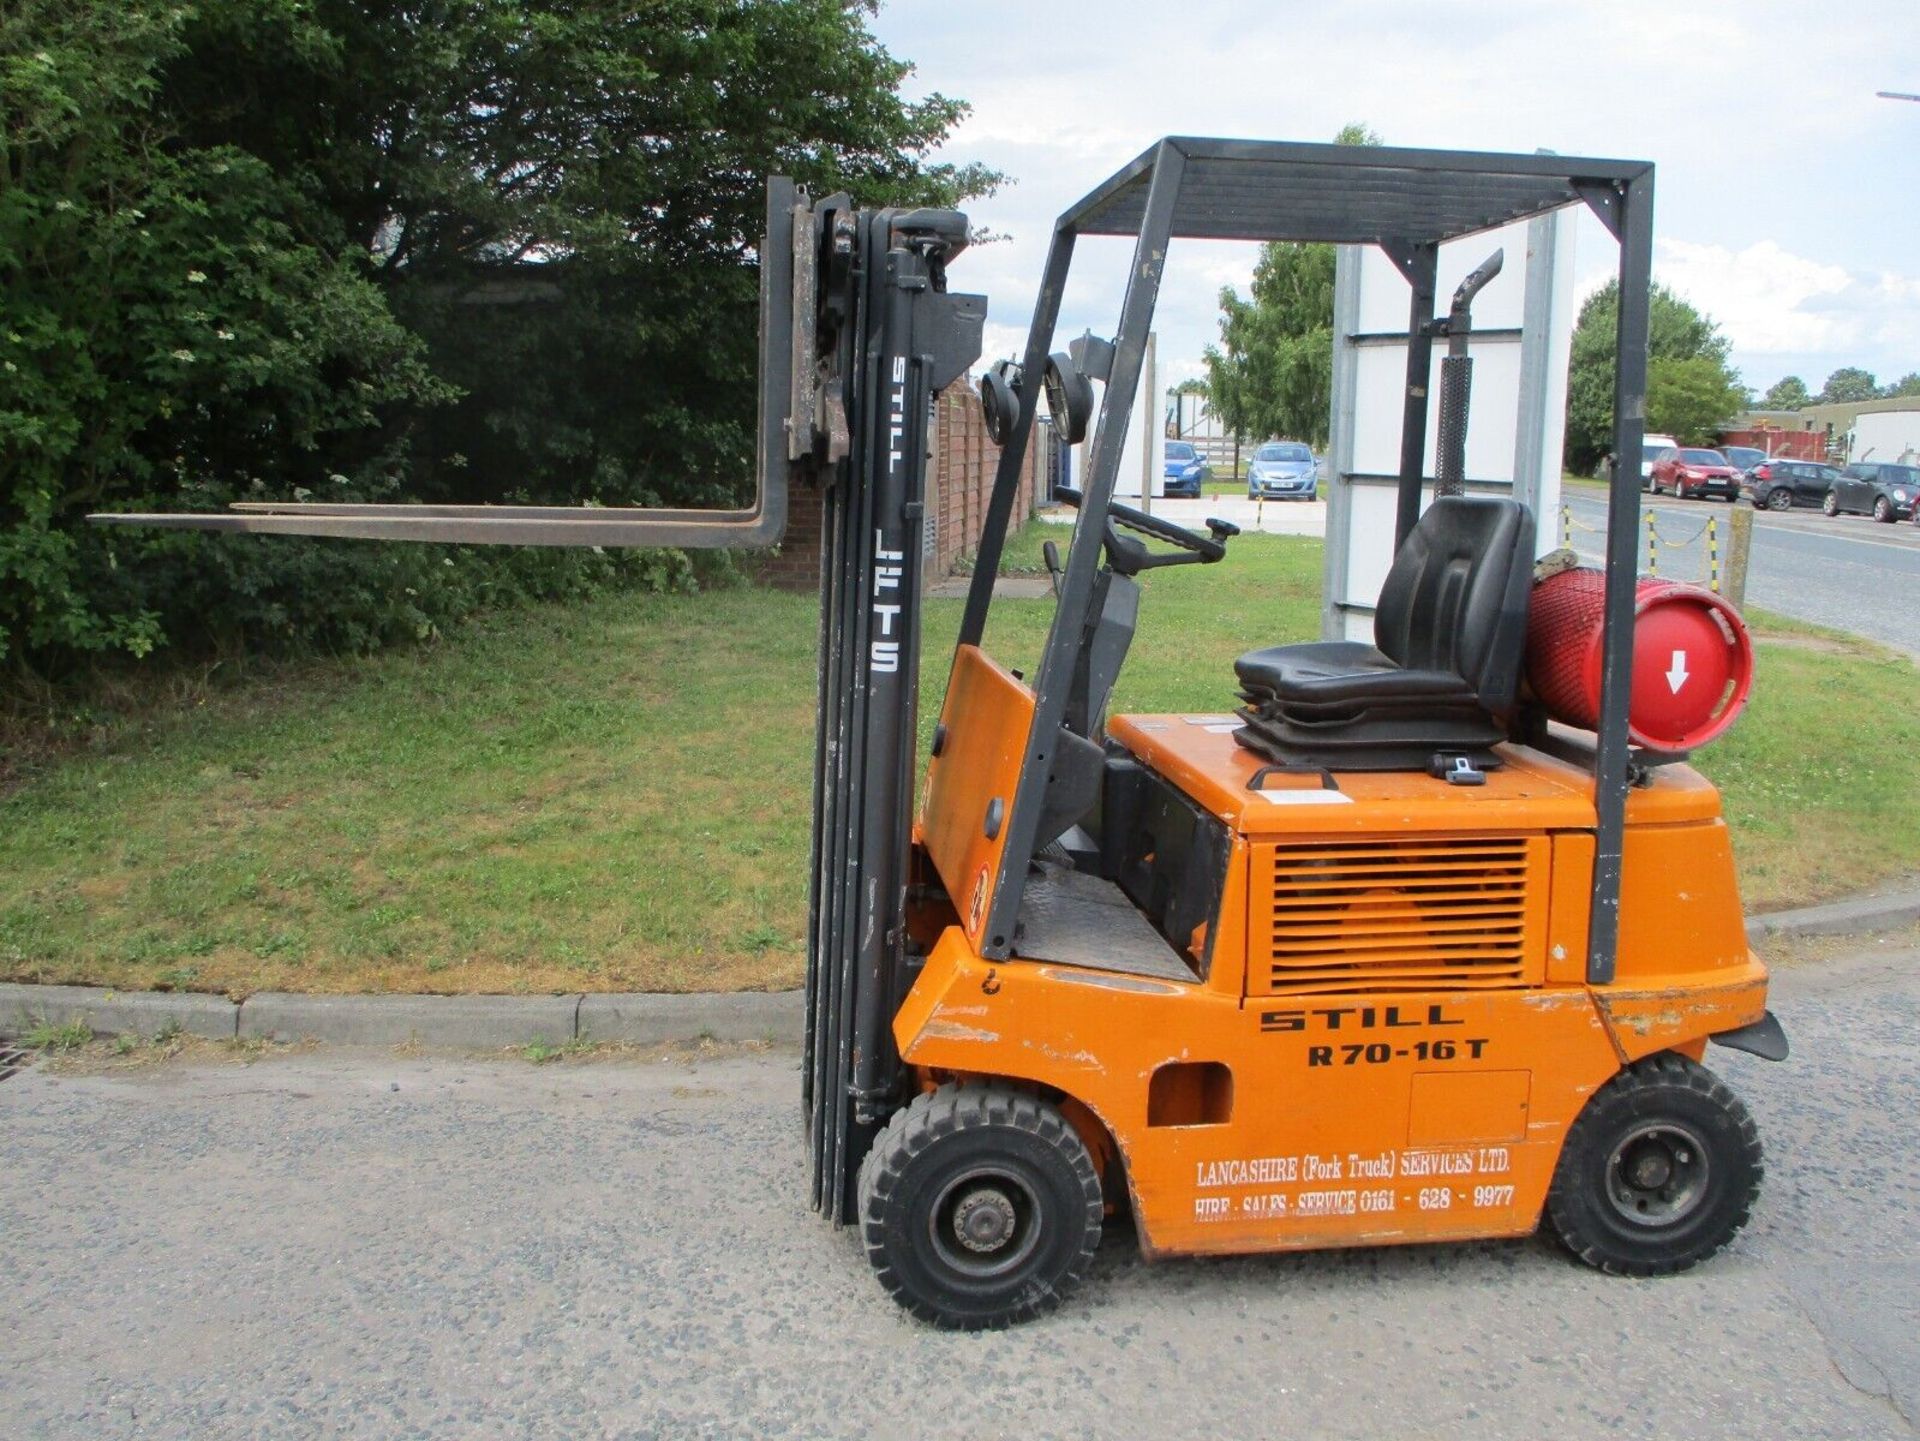 STILL R70-16T FORK LIFT FORKLIFT TRUCK STACKER CONTAINER SPEC TRIPLE MAST - Image 9 of 12